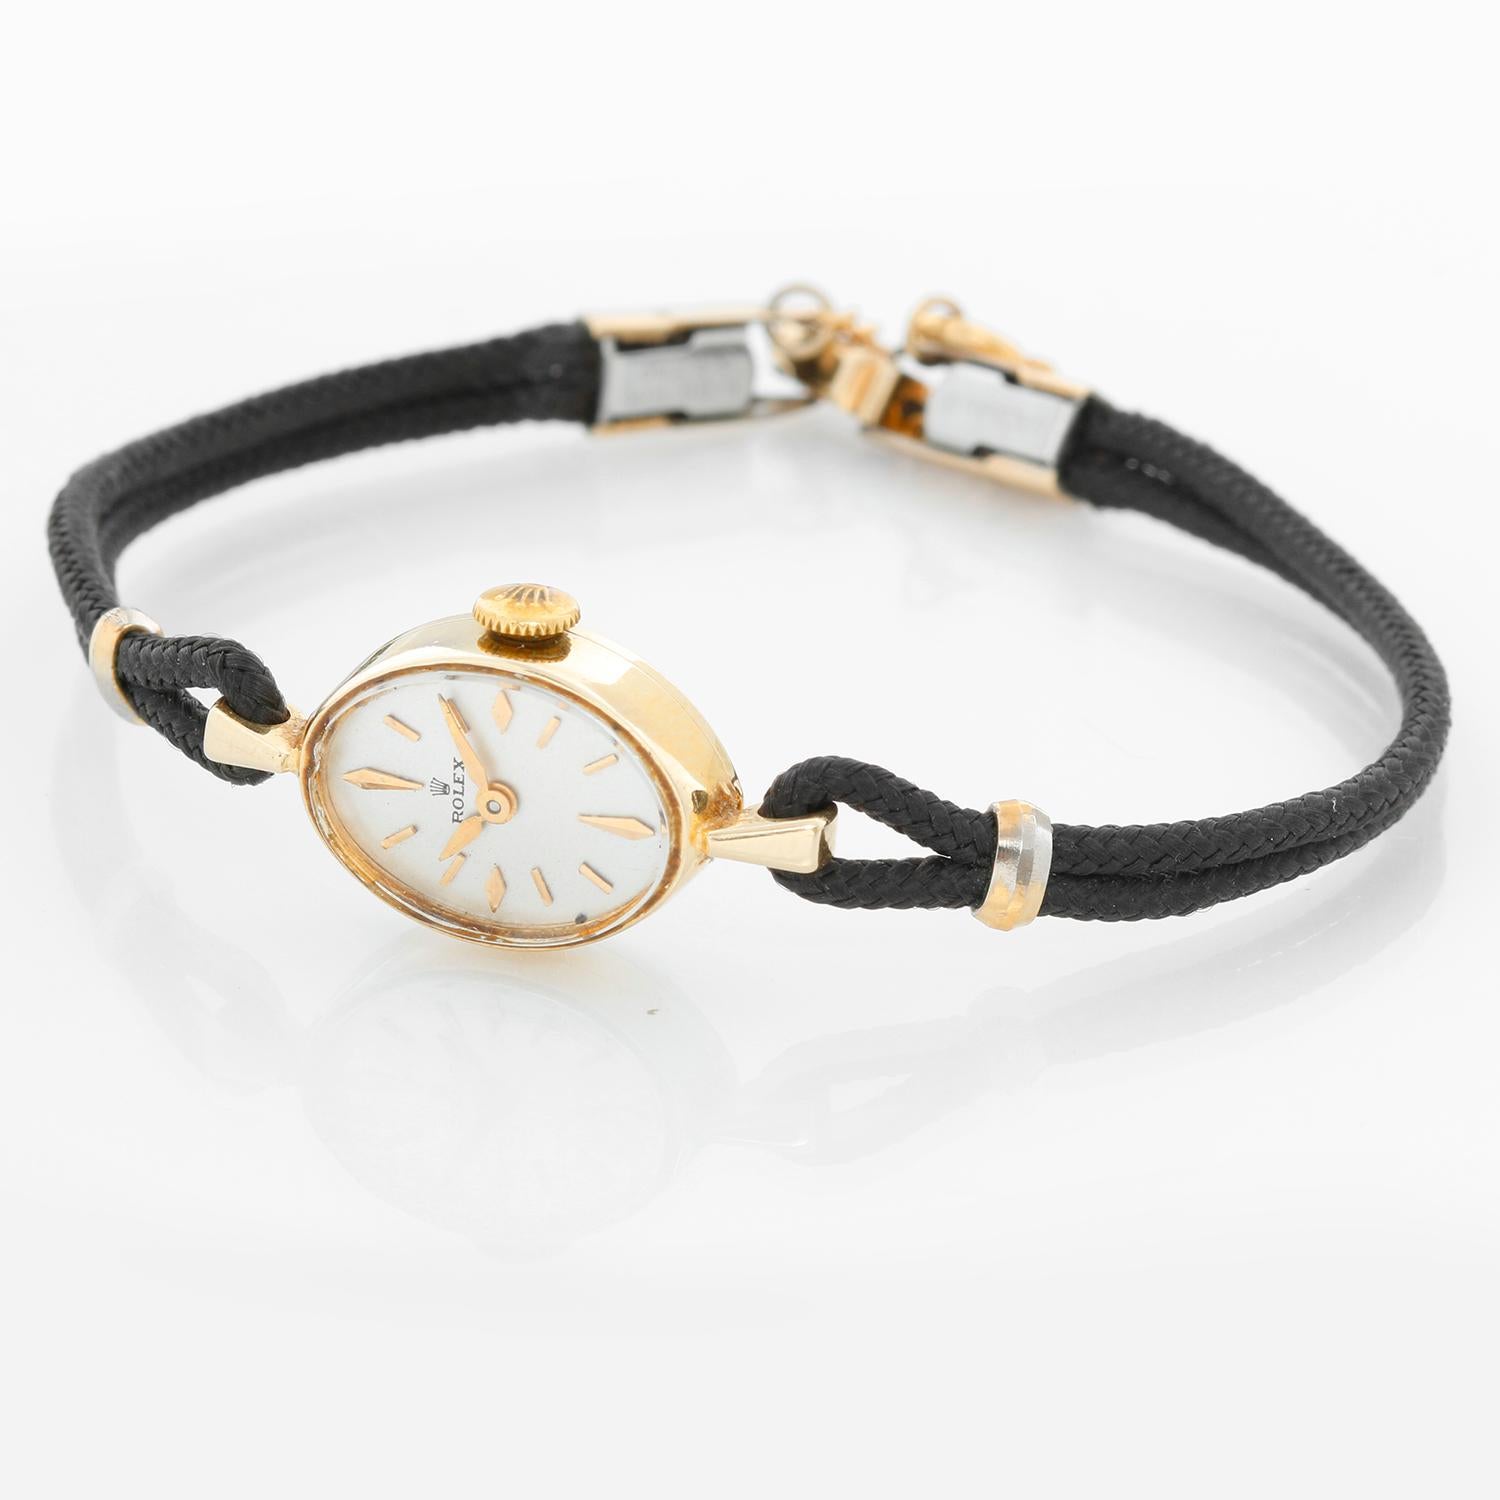 Vintage Rolex Ladies Dress Watch - Manual winding. 14K Yellow gold ( 12 x 18 mm ). Silver dial with raised index. Black double rope bracelet; will fit a 6 1/2 inch wrist. Pre-owned with custom box .